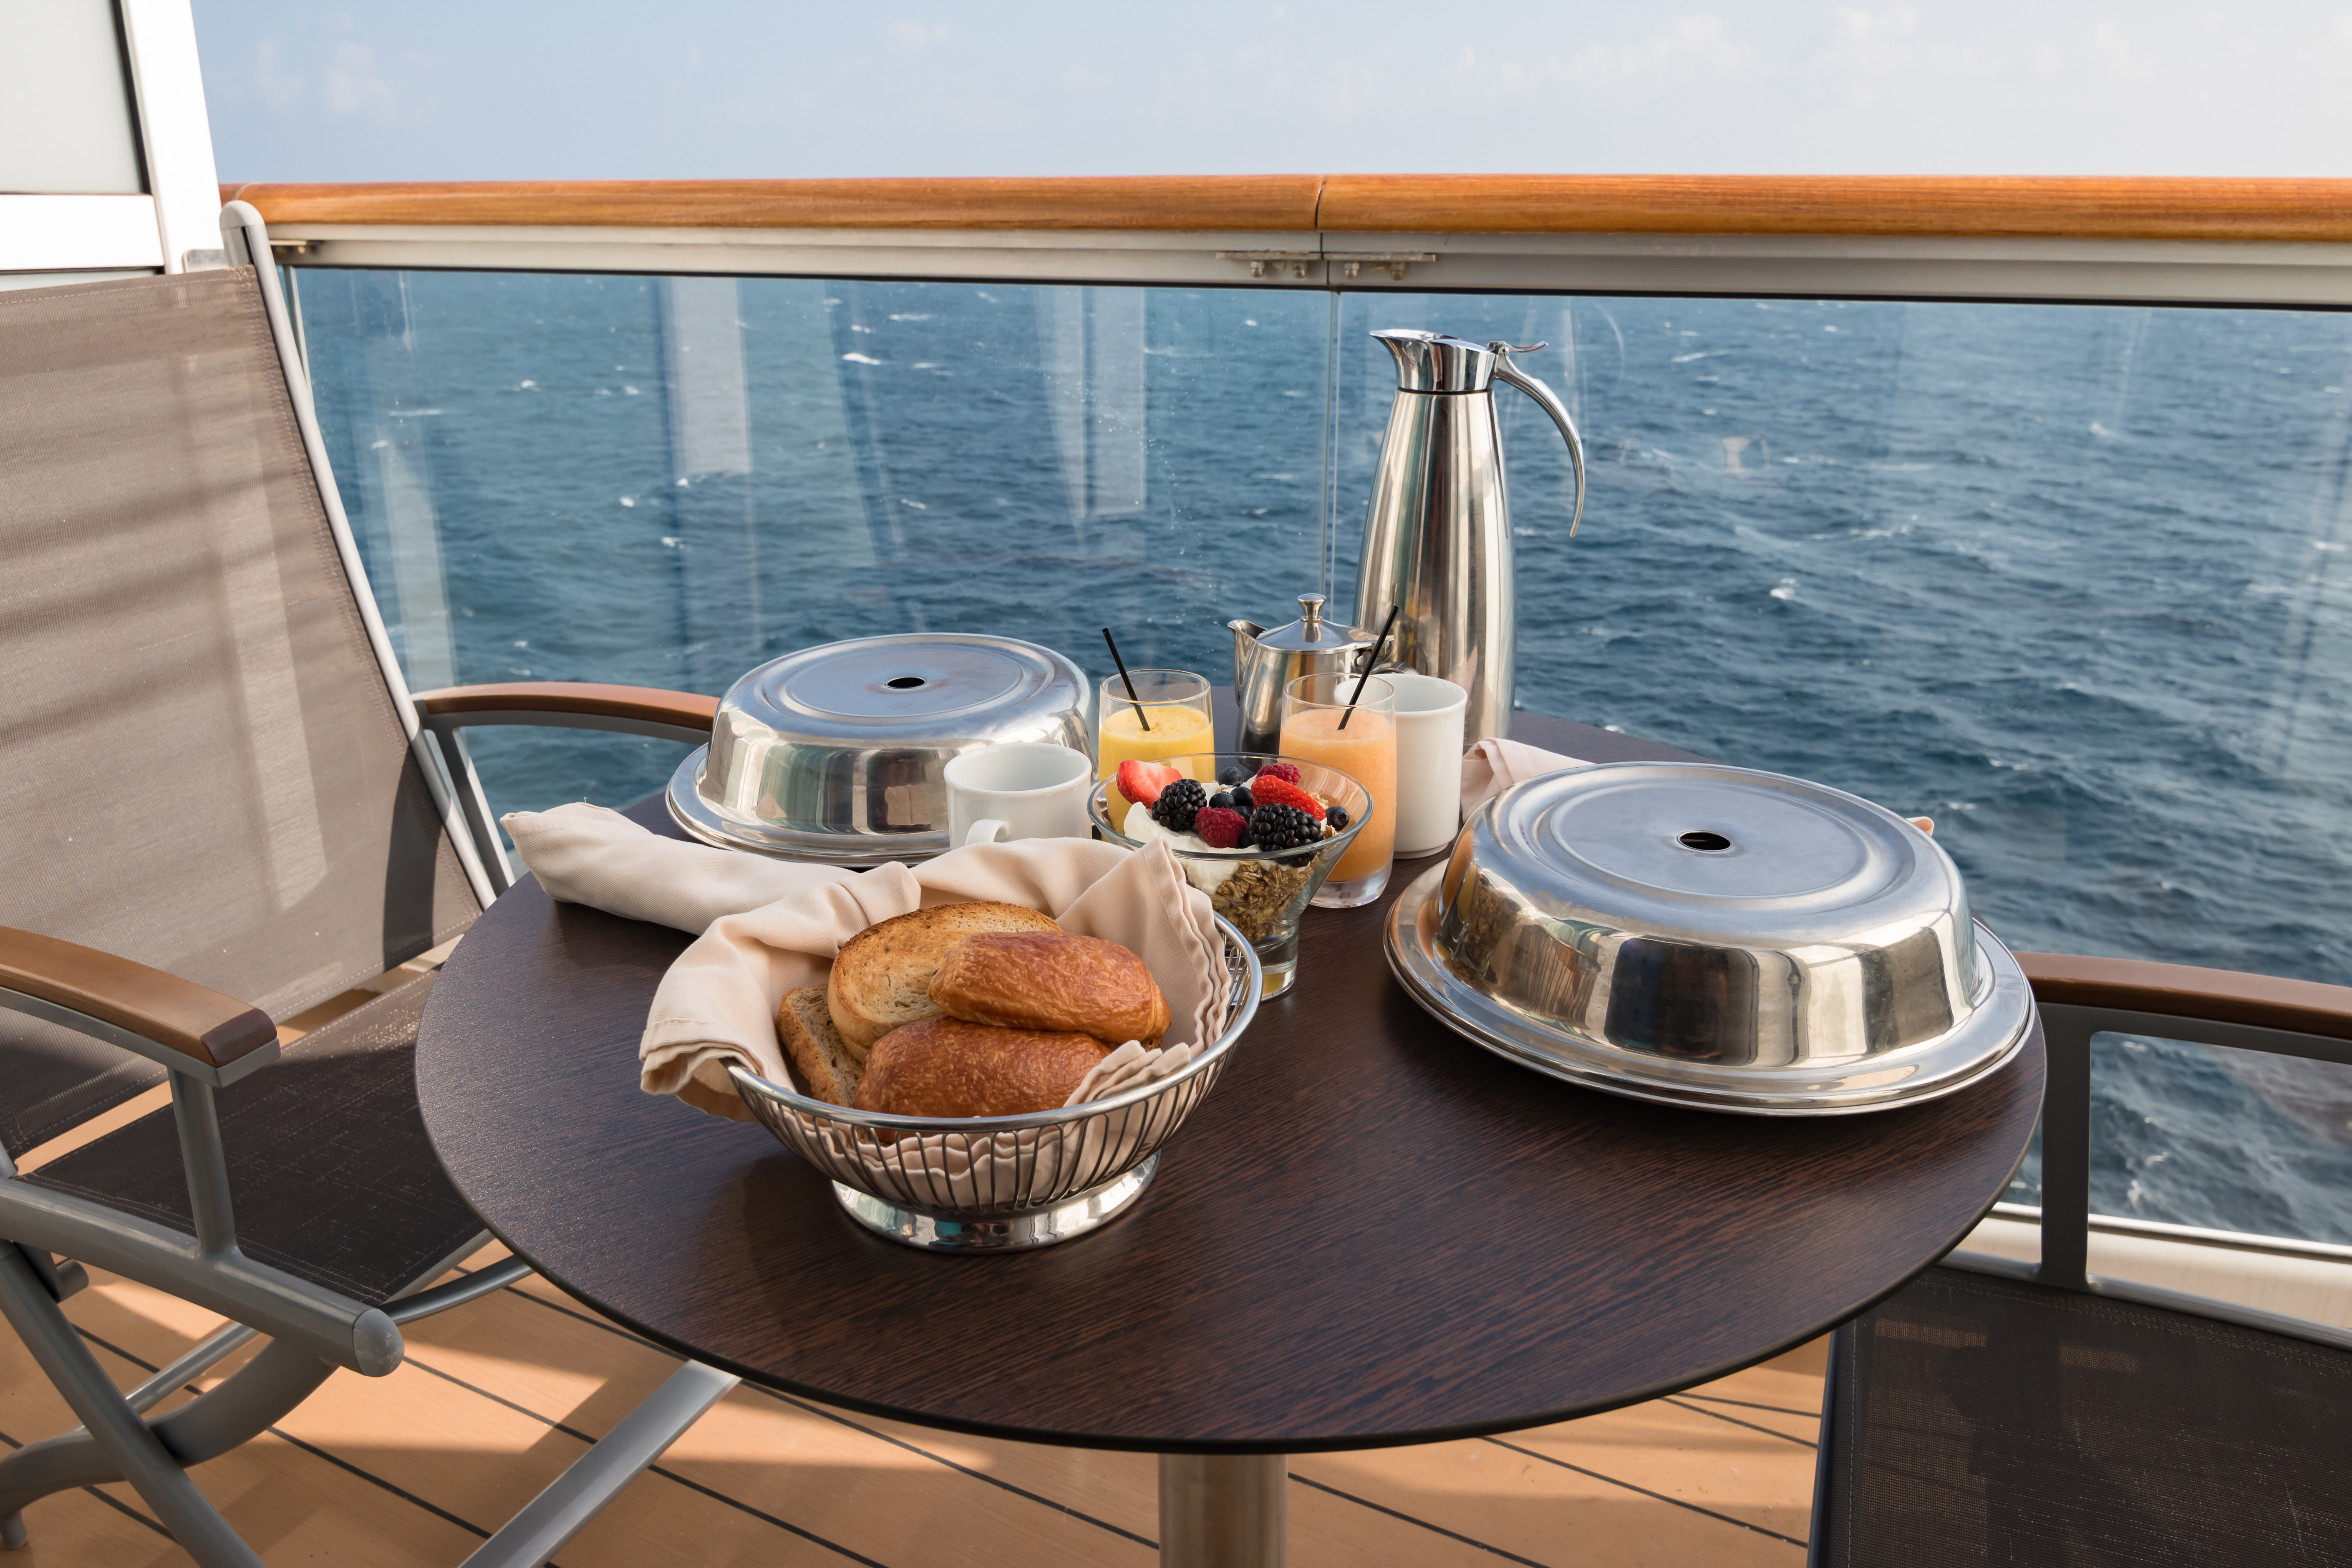 Cruise lines and airlines are adapting to meet consumers' evolving needs by upgrading foodservice options.